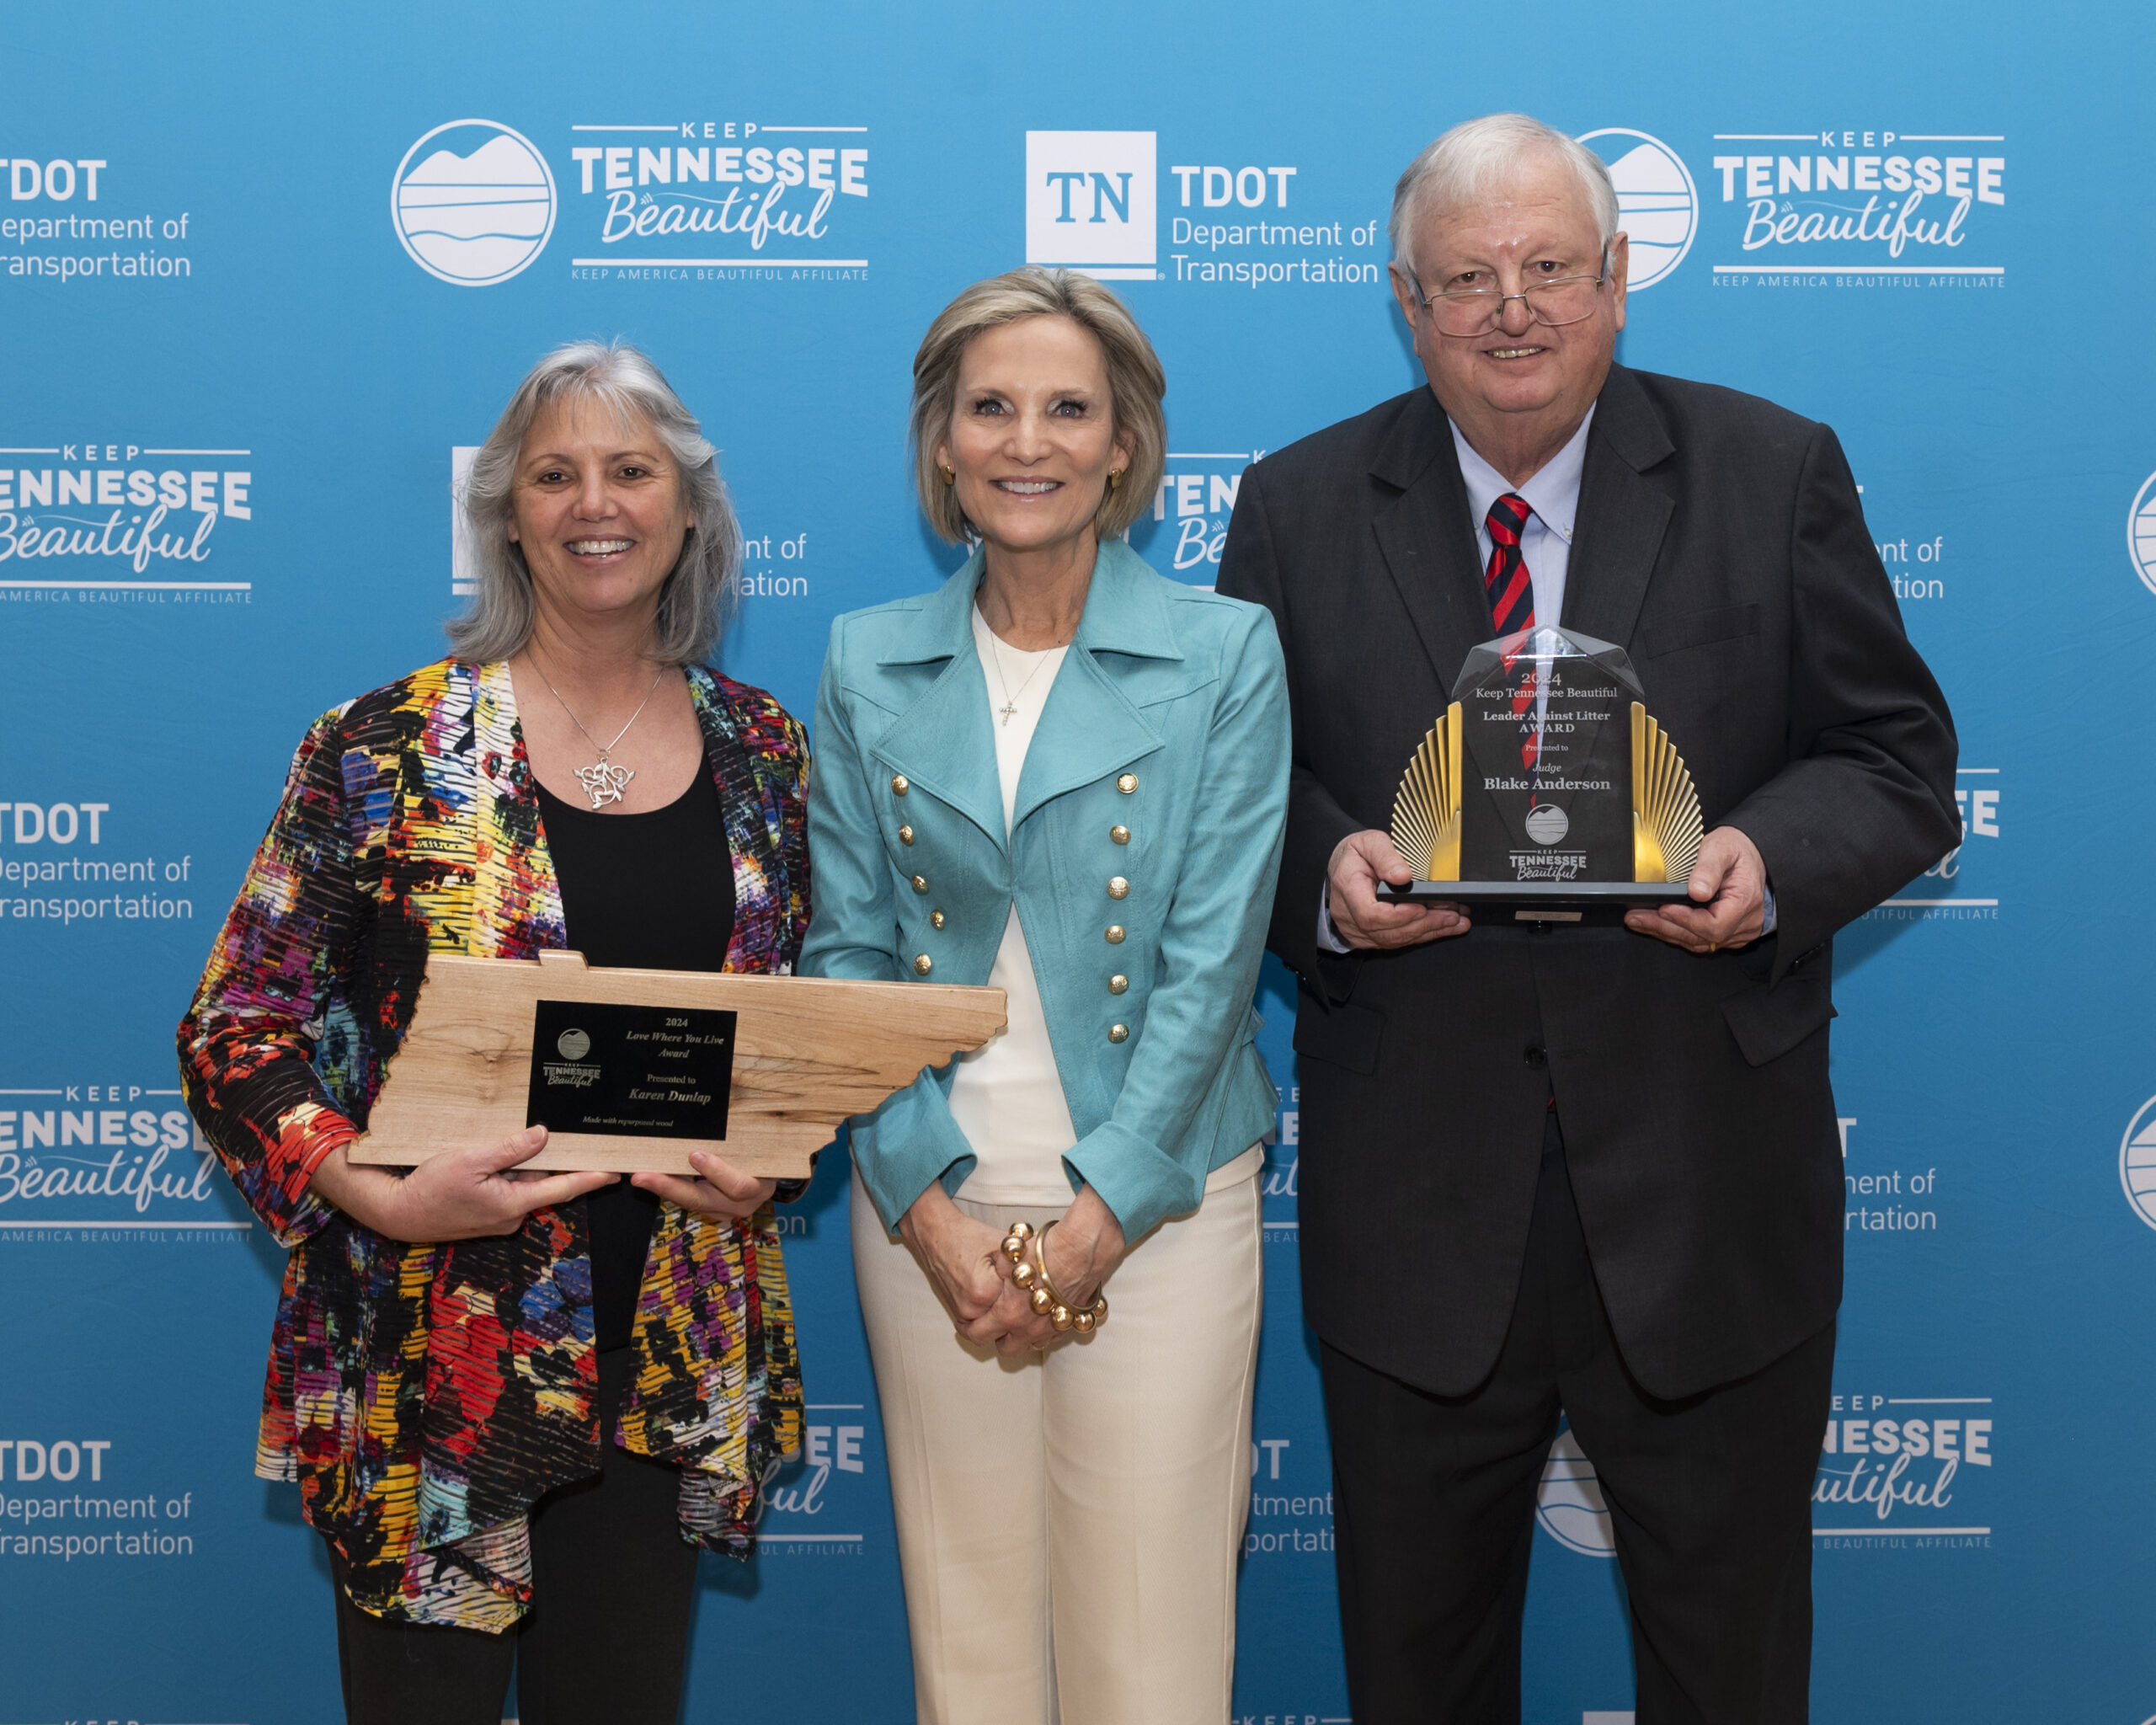 Left to right, Karen Dunlap, Love Where You Live Award recipient Executive Director Missy Marshall, KTnB Judge Blake Anderson, Leader Against Litter Award recipient. Photo Courtesy of Keep Tennessee Beautiful.